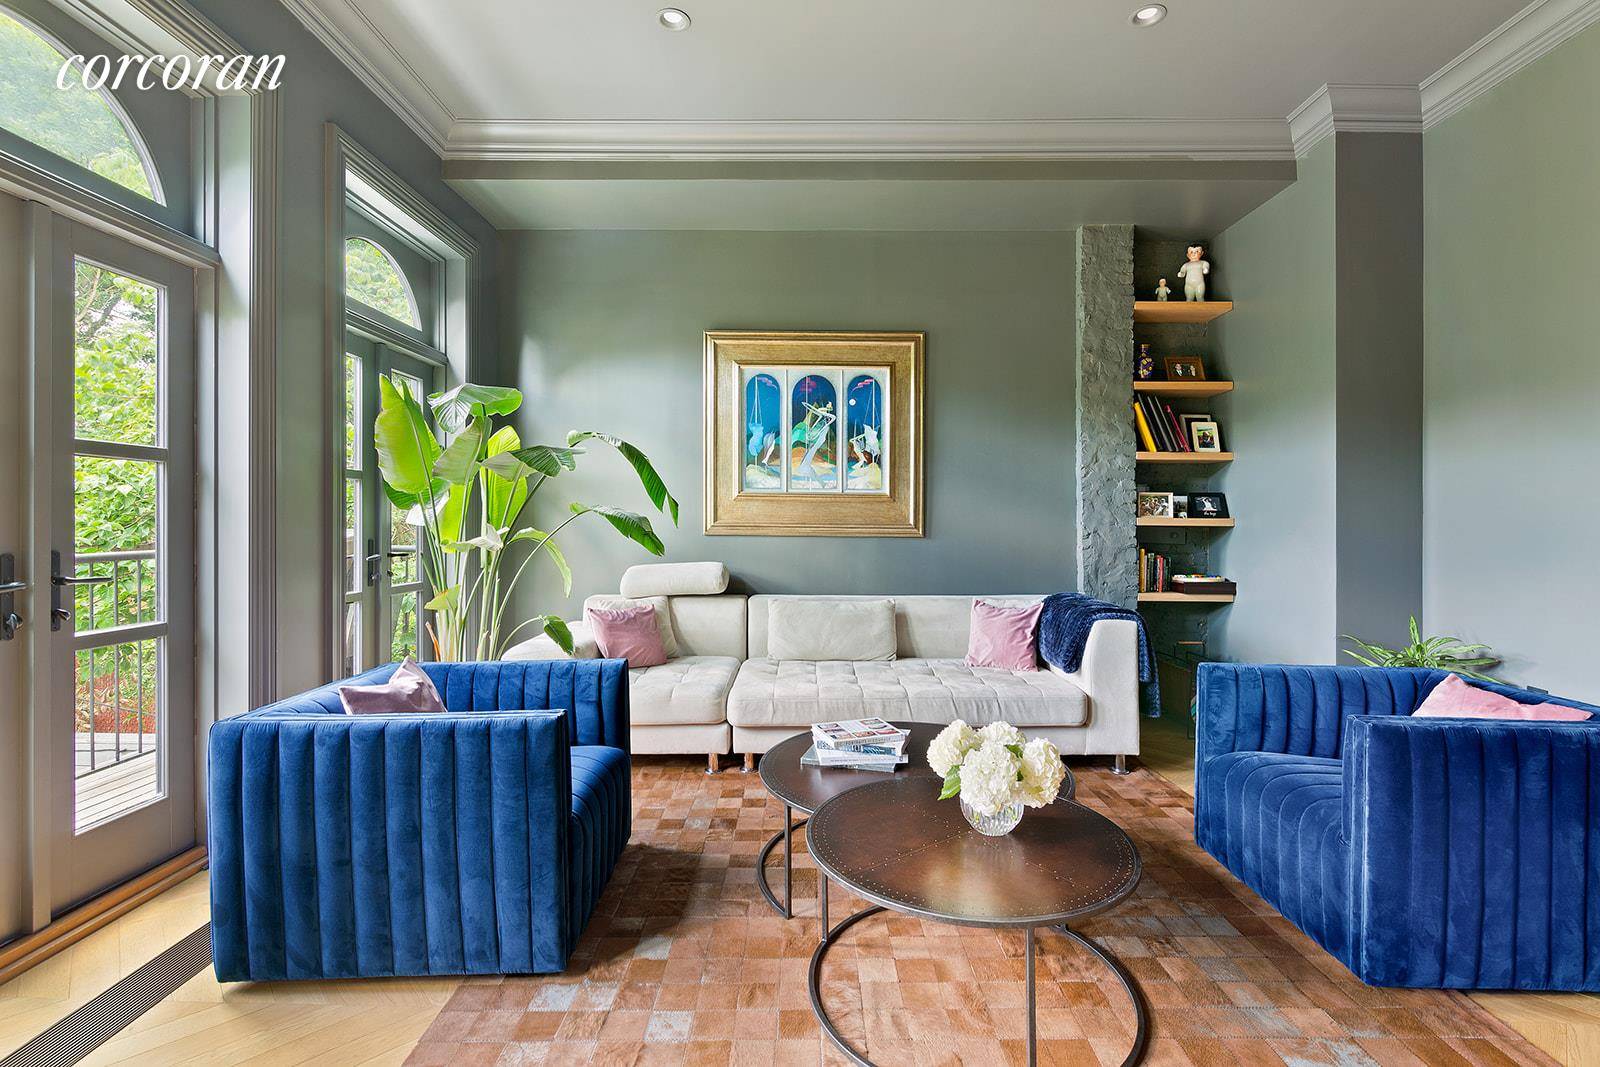 Behind an immaculate and traditional brownstone faade lies a spectacularly renovated 2 family townhouse that will be loved by modern and traditional aficionados alike !